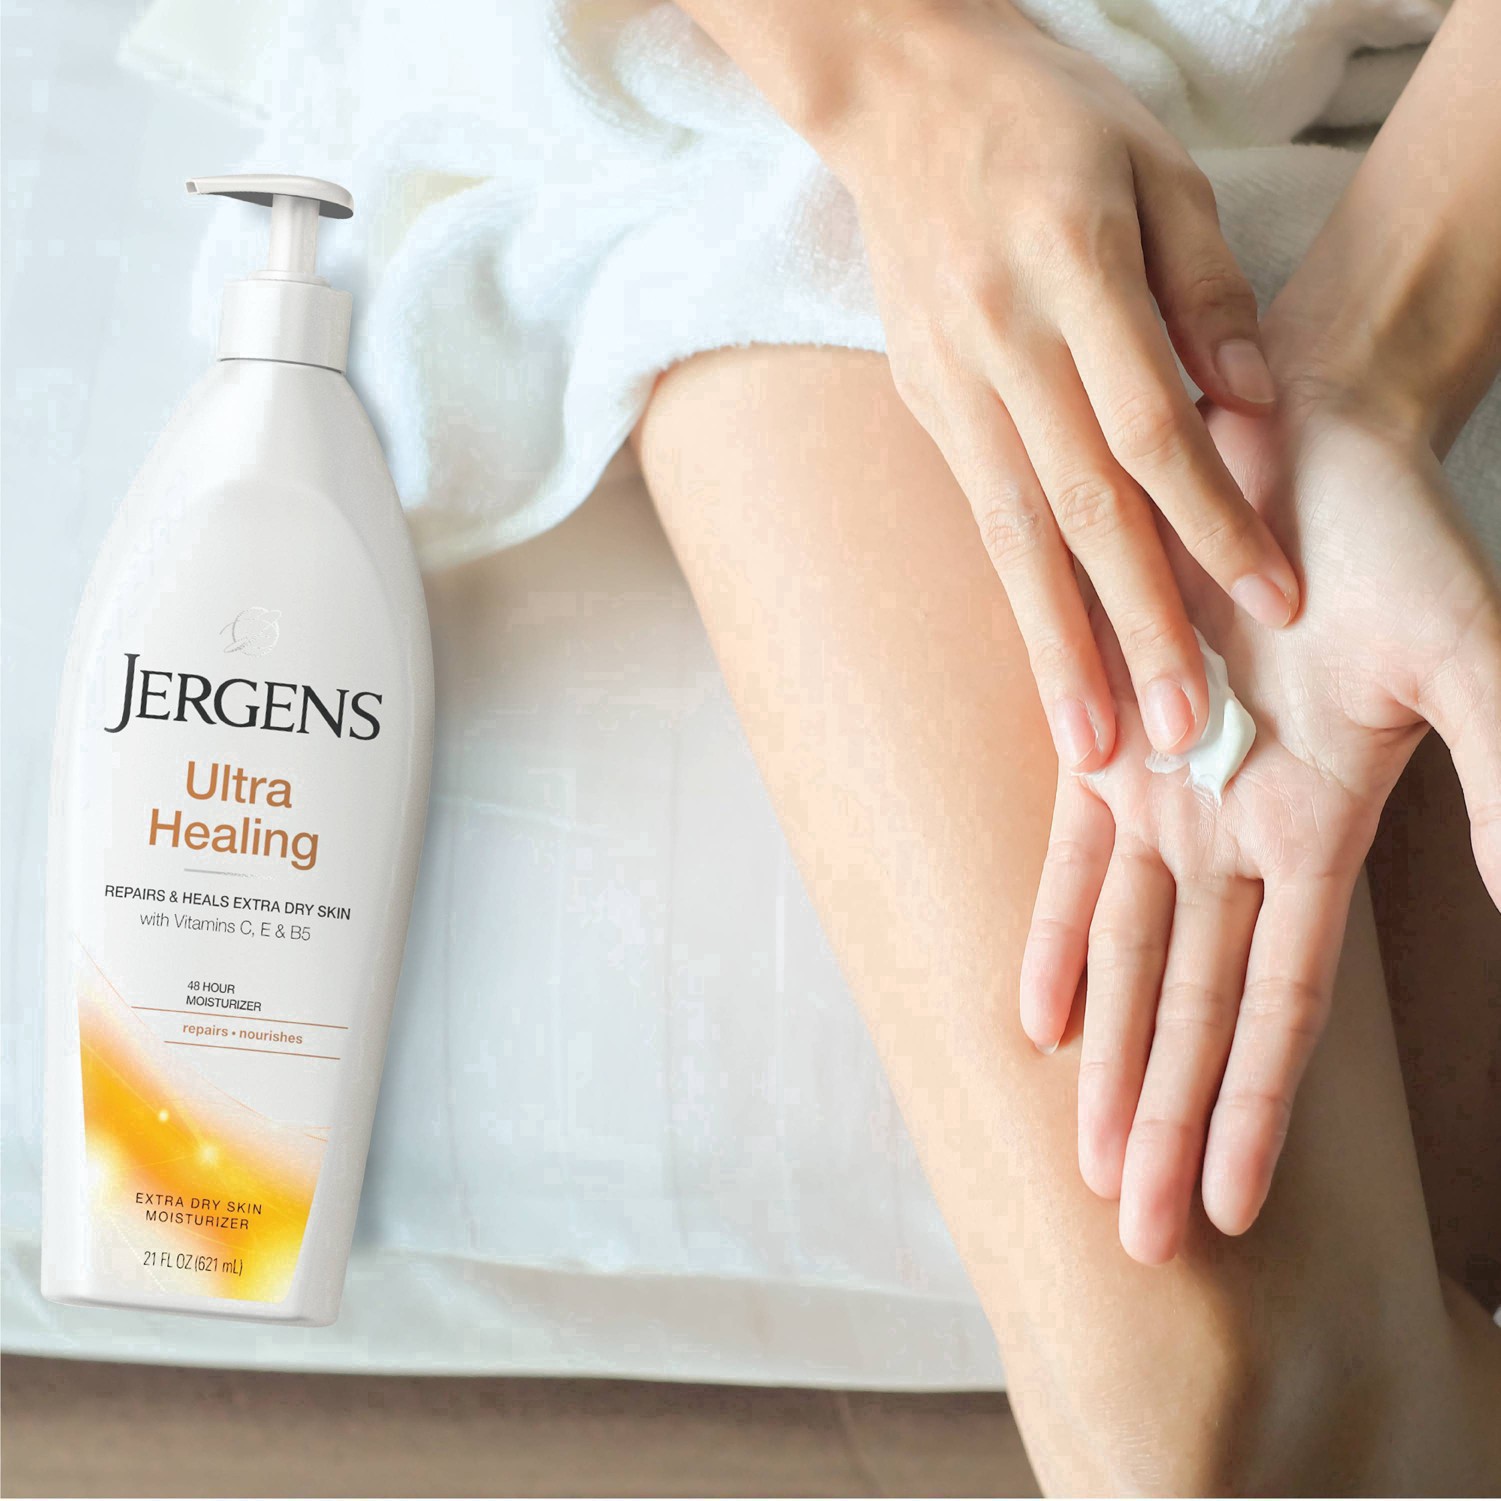 slide 64 of 67, Jergens Ultra Healing Dry Skin Moisturizer, Body and Hand Lotion, for Absorption into Extra Dry Skin, 21 Oz, 21 fl oz